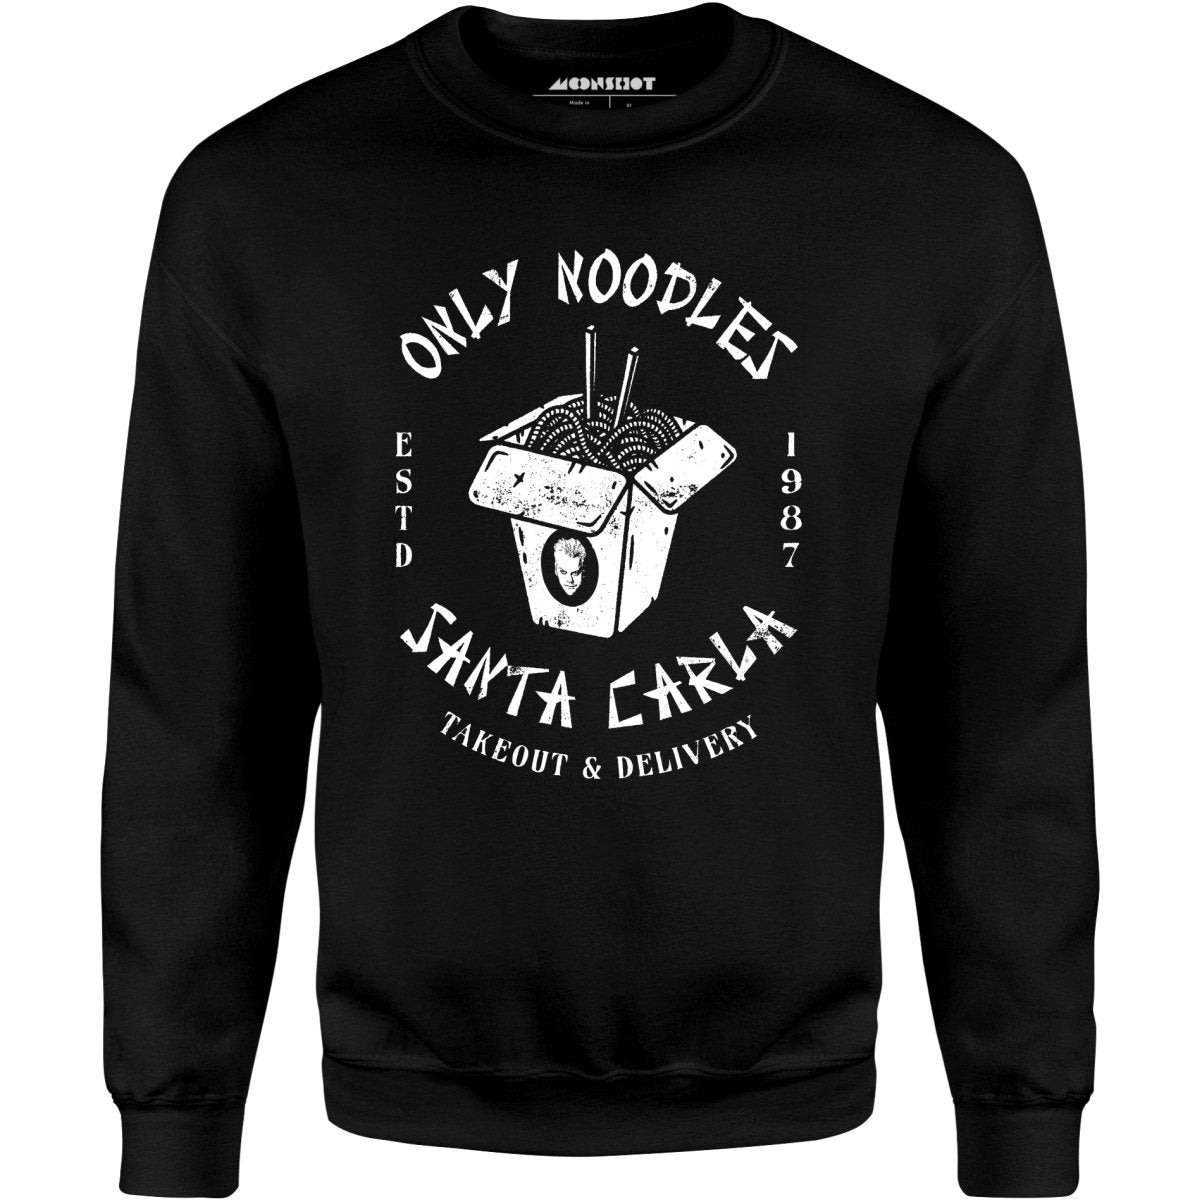 Only Noodles Takeout & Delivery - Santa Carla - Unisex Sweatshirt